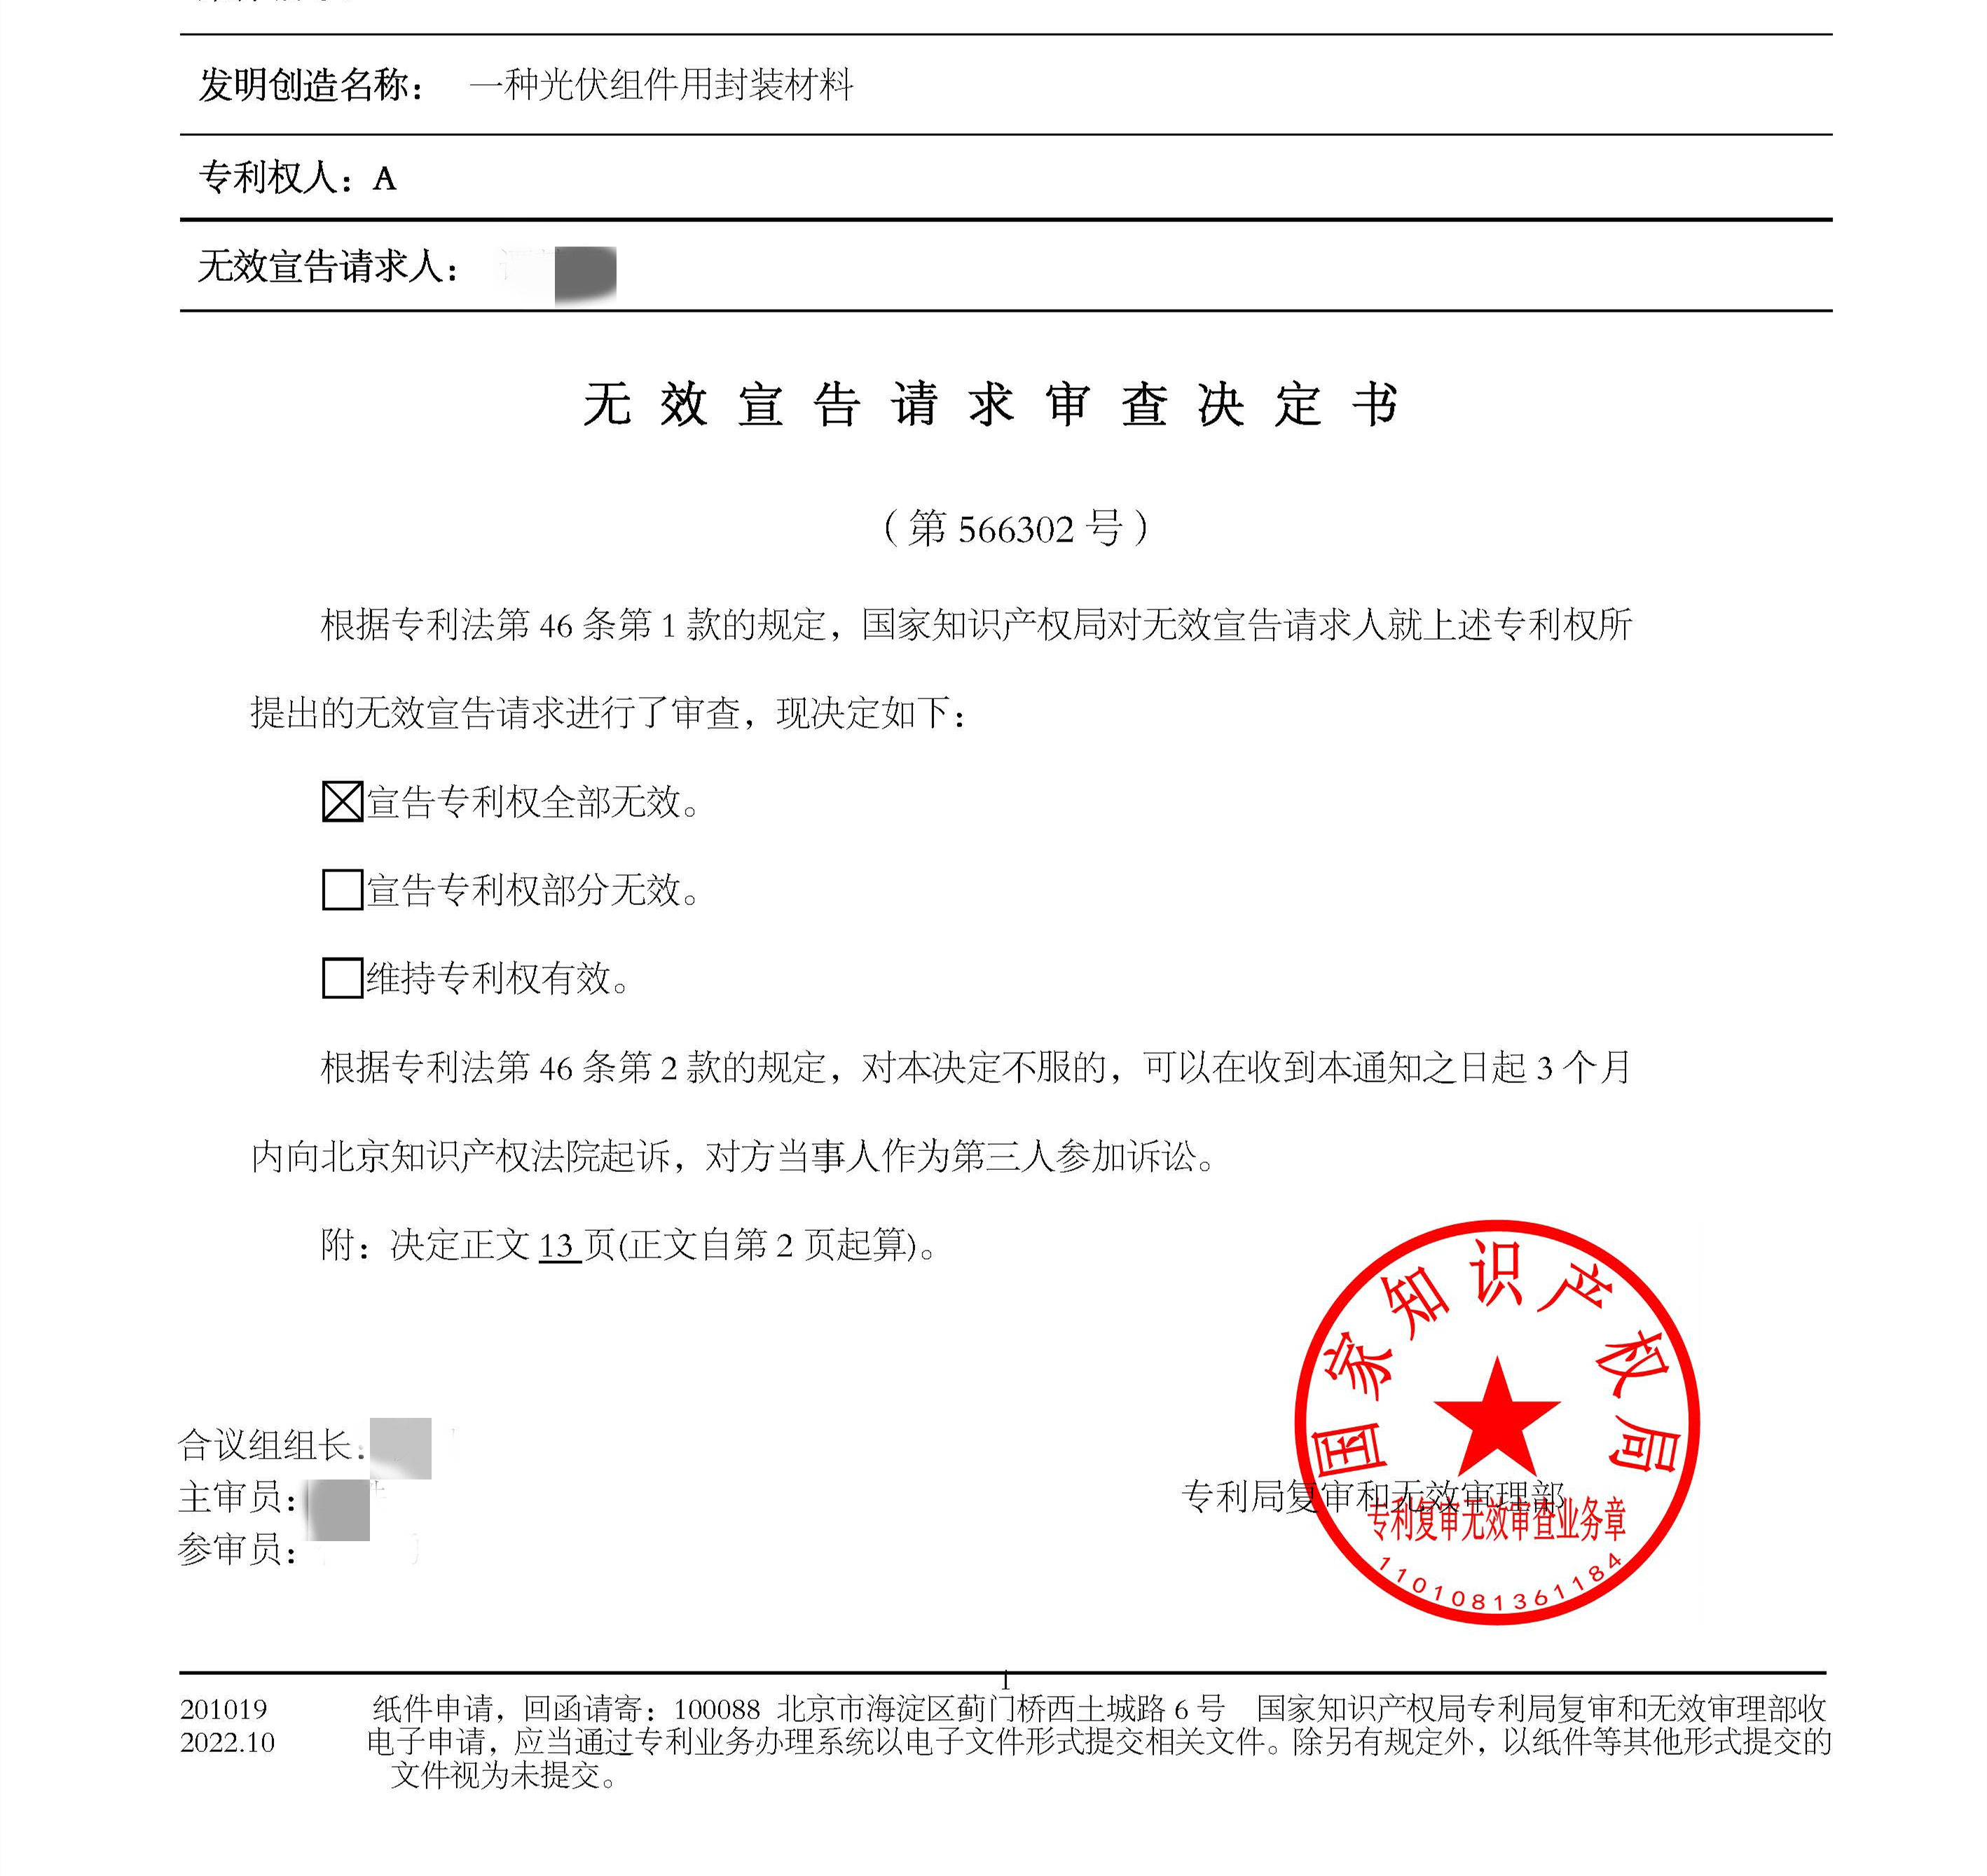 A patent owned by Sunman New Energy is successfully invalidated by TianDun IP